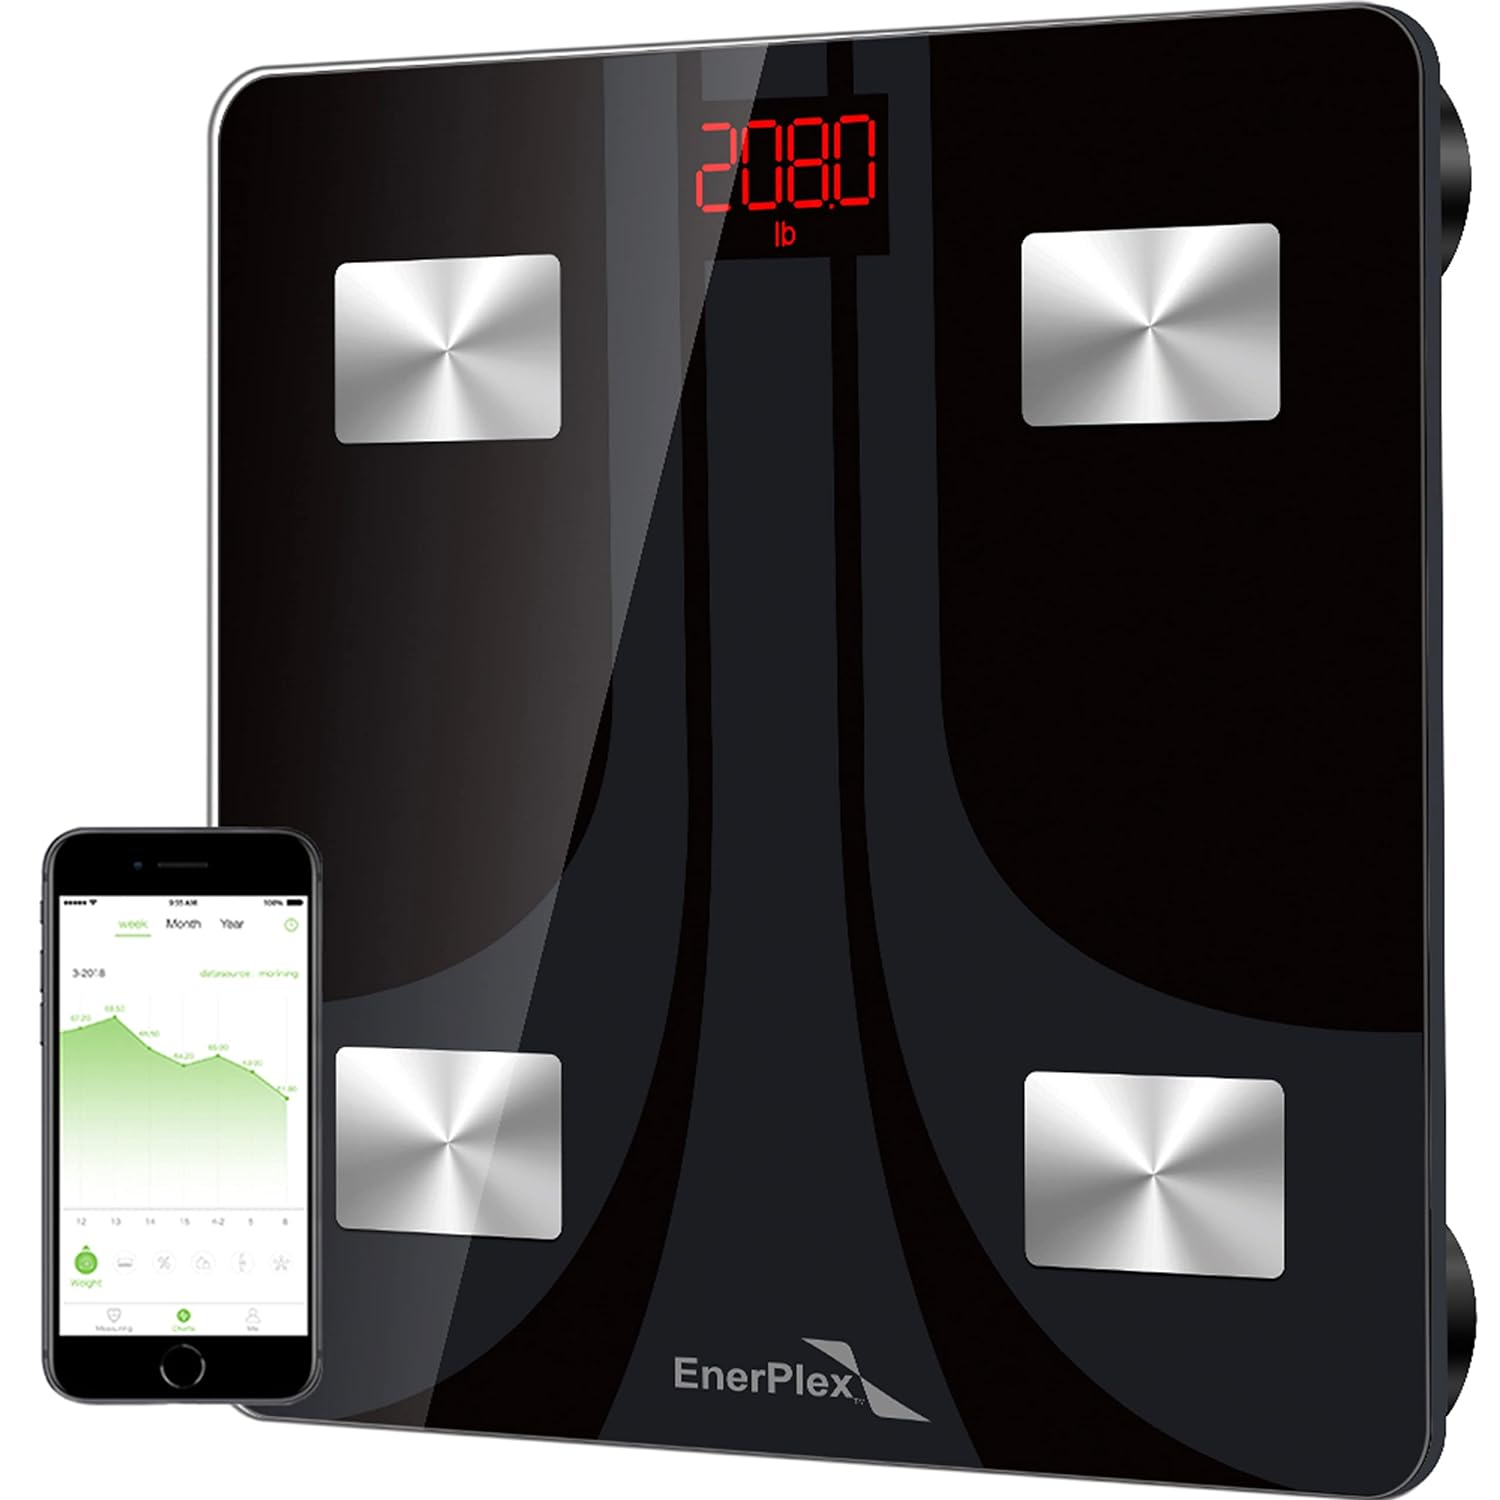 EnerPlex Scale for Body Weight - Accurate Digital BMI Bathroom and Home Scale for Weighing and Home Workout - Black